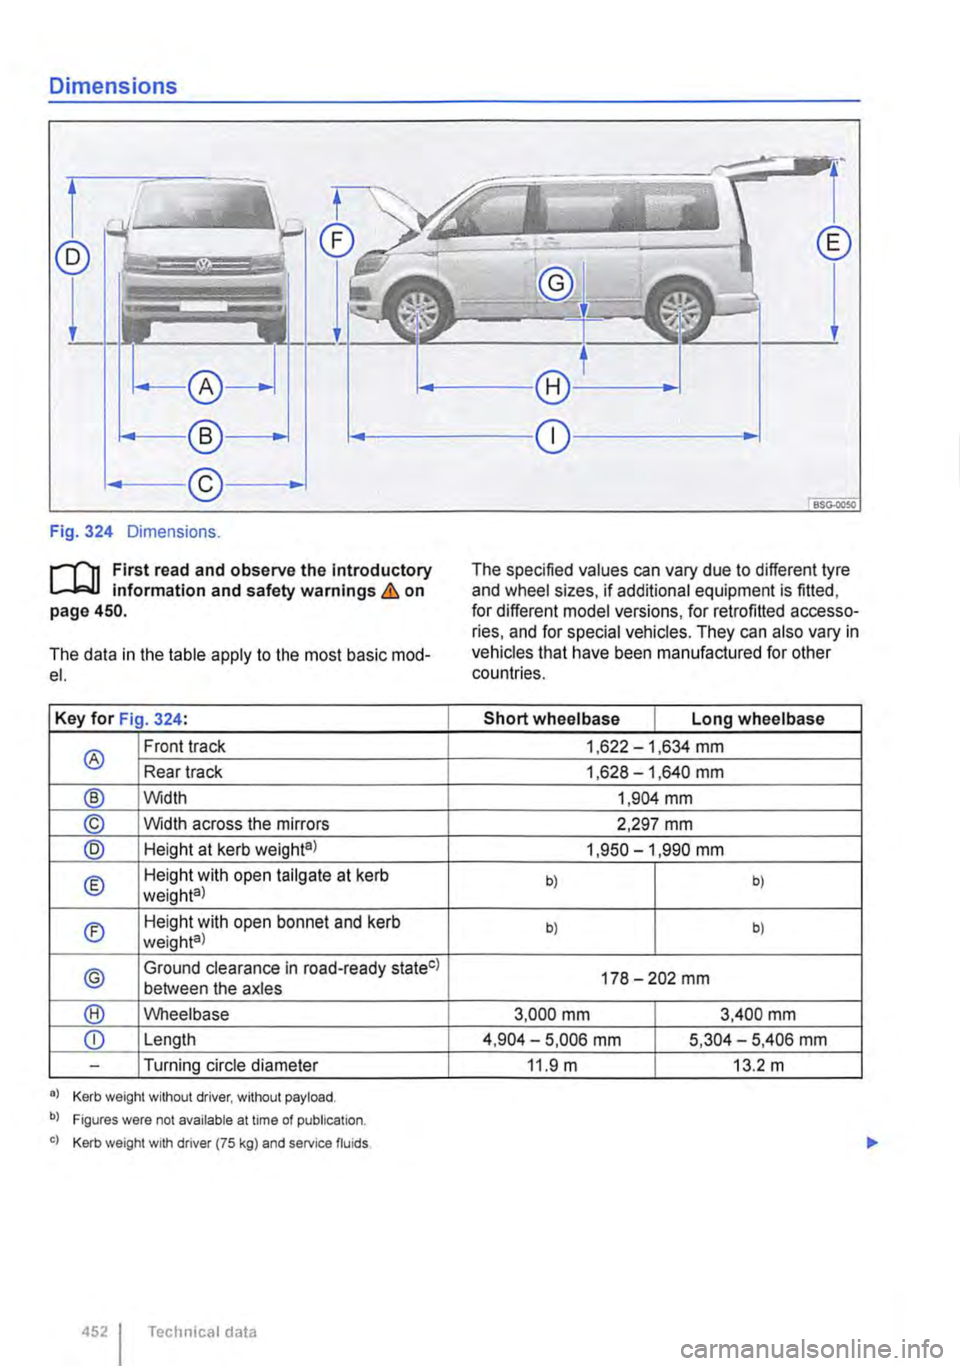 VOLKSWAGEN TRANSPORTER 2019  Owners Manual Dimensions 
Fig. 324 Dimensions. 
l""""(n First read and observe the introductory L-J,.:.U information and safety warnings & on page 450. 
The data in the table apply to the most basic mod-el. 
Key 